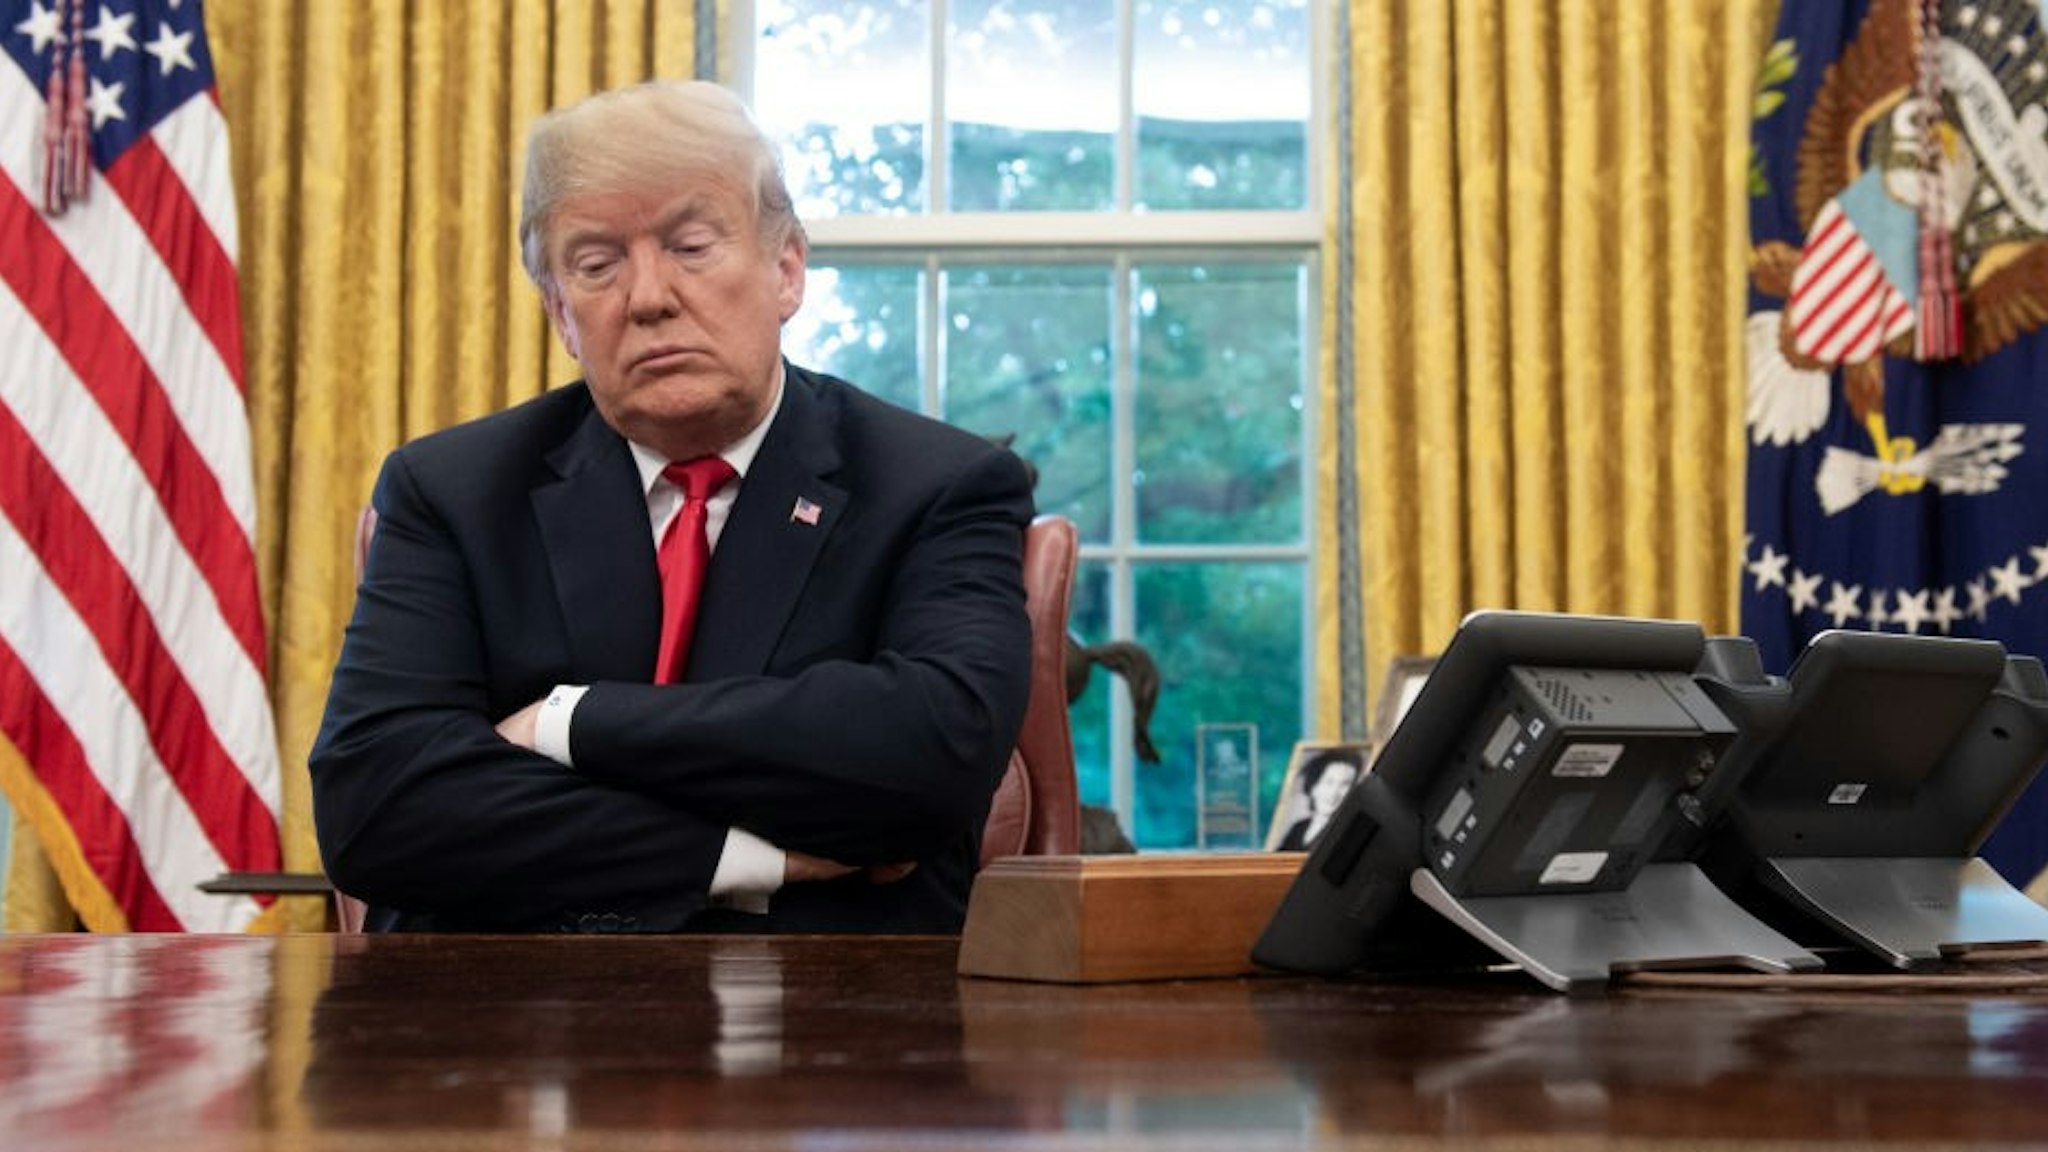 US President Donald Trump sits at the Resolute Desk during a briefing on Hurricane Michael in the Oval Office of the White House in Washington, DC, October 10, 2018.